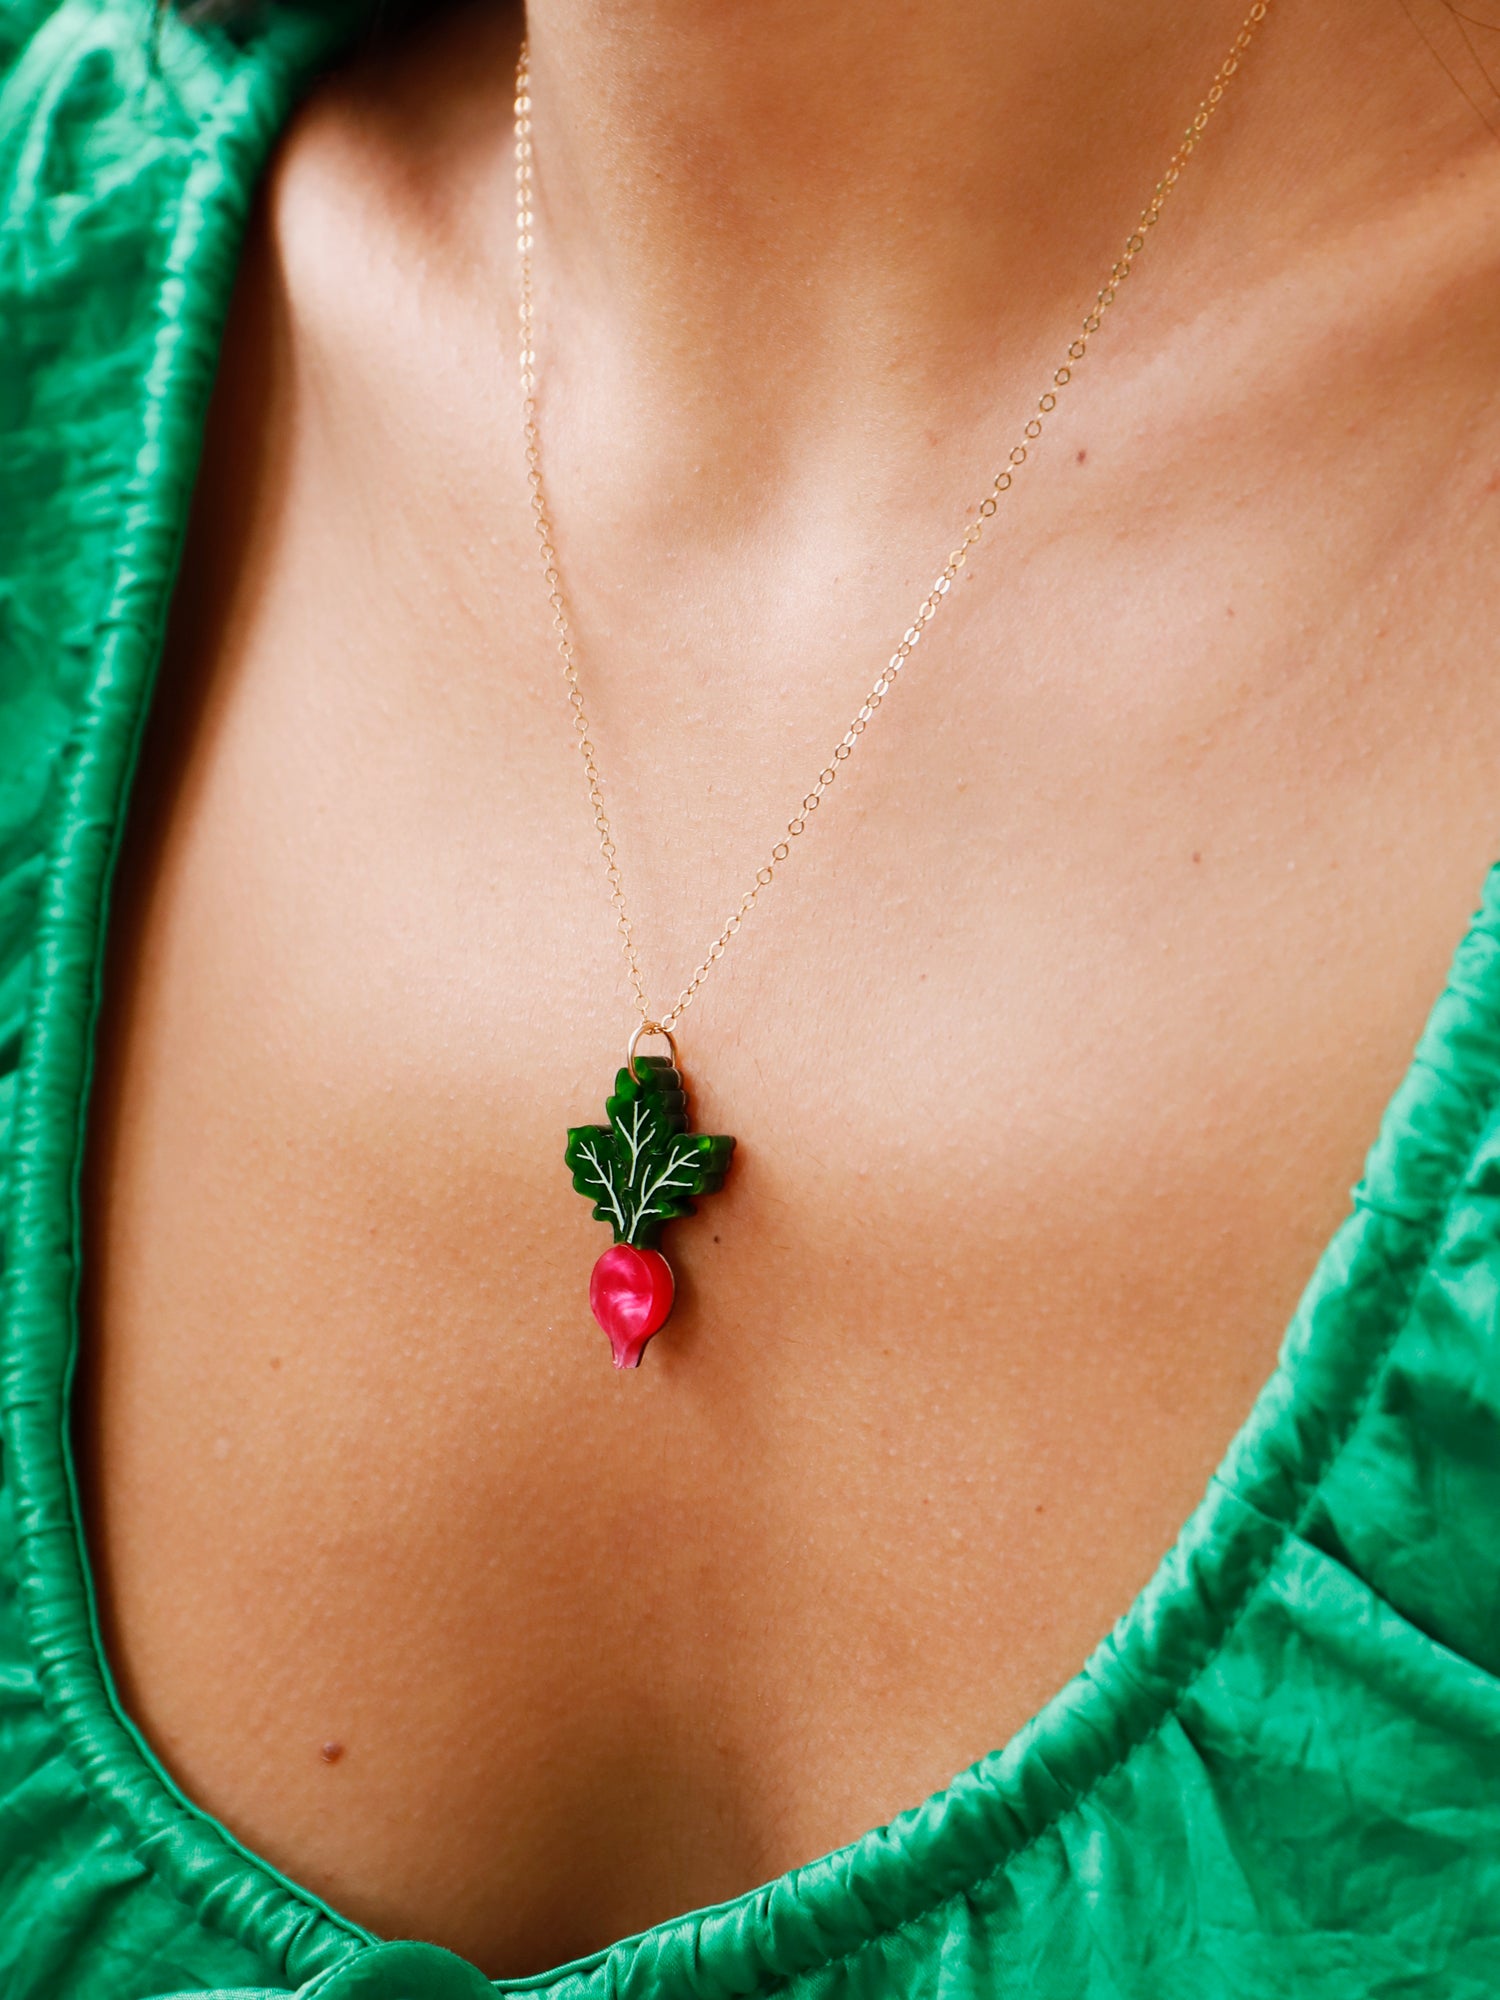 Pink and green mini acrylic radish pendant necklace with optional gold-filled chain. Handmade in London by Wolf & Moon.